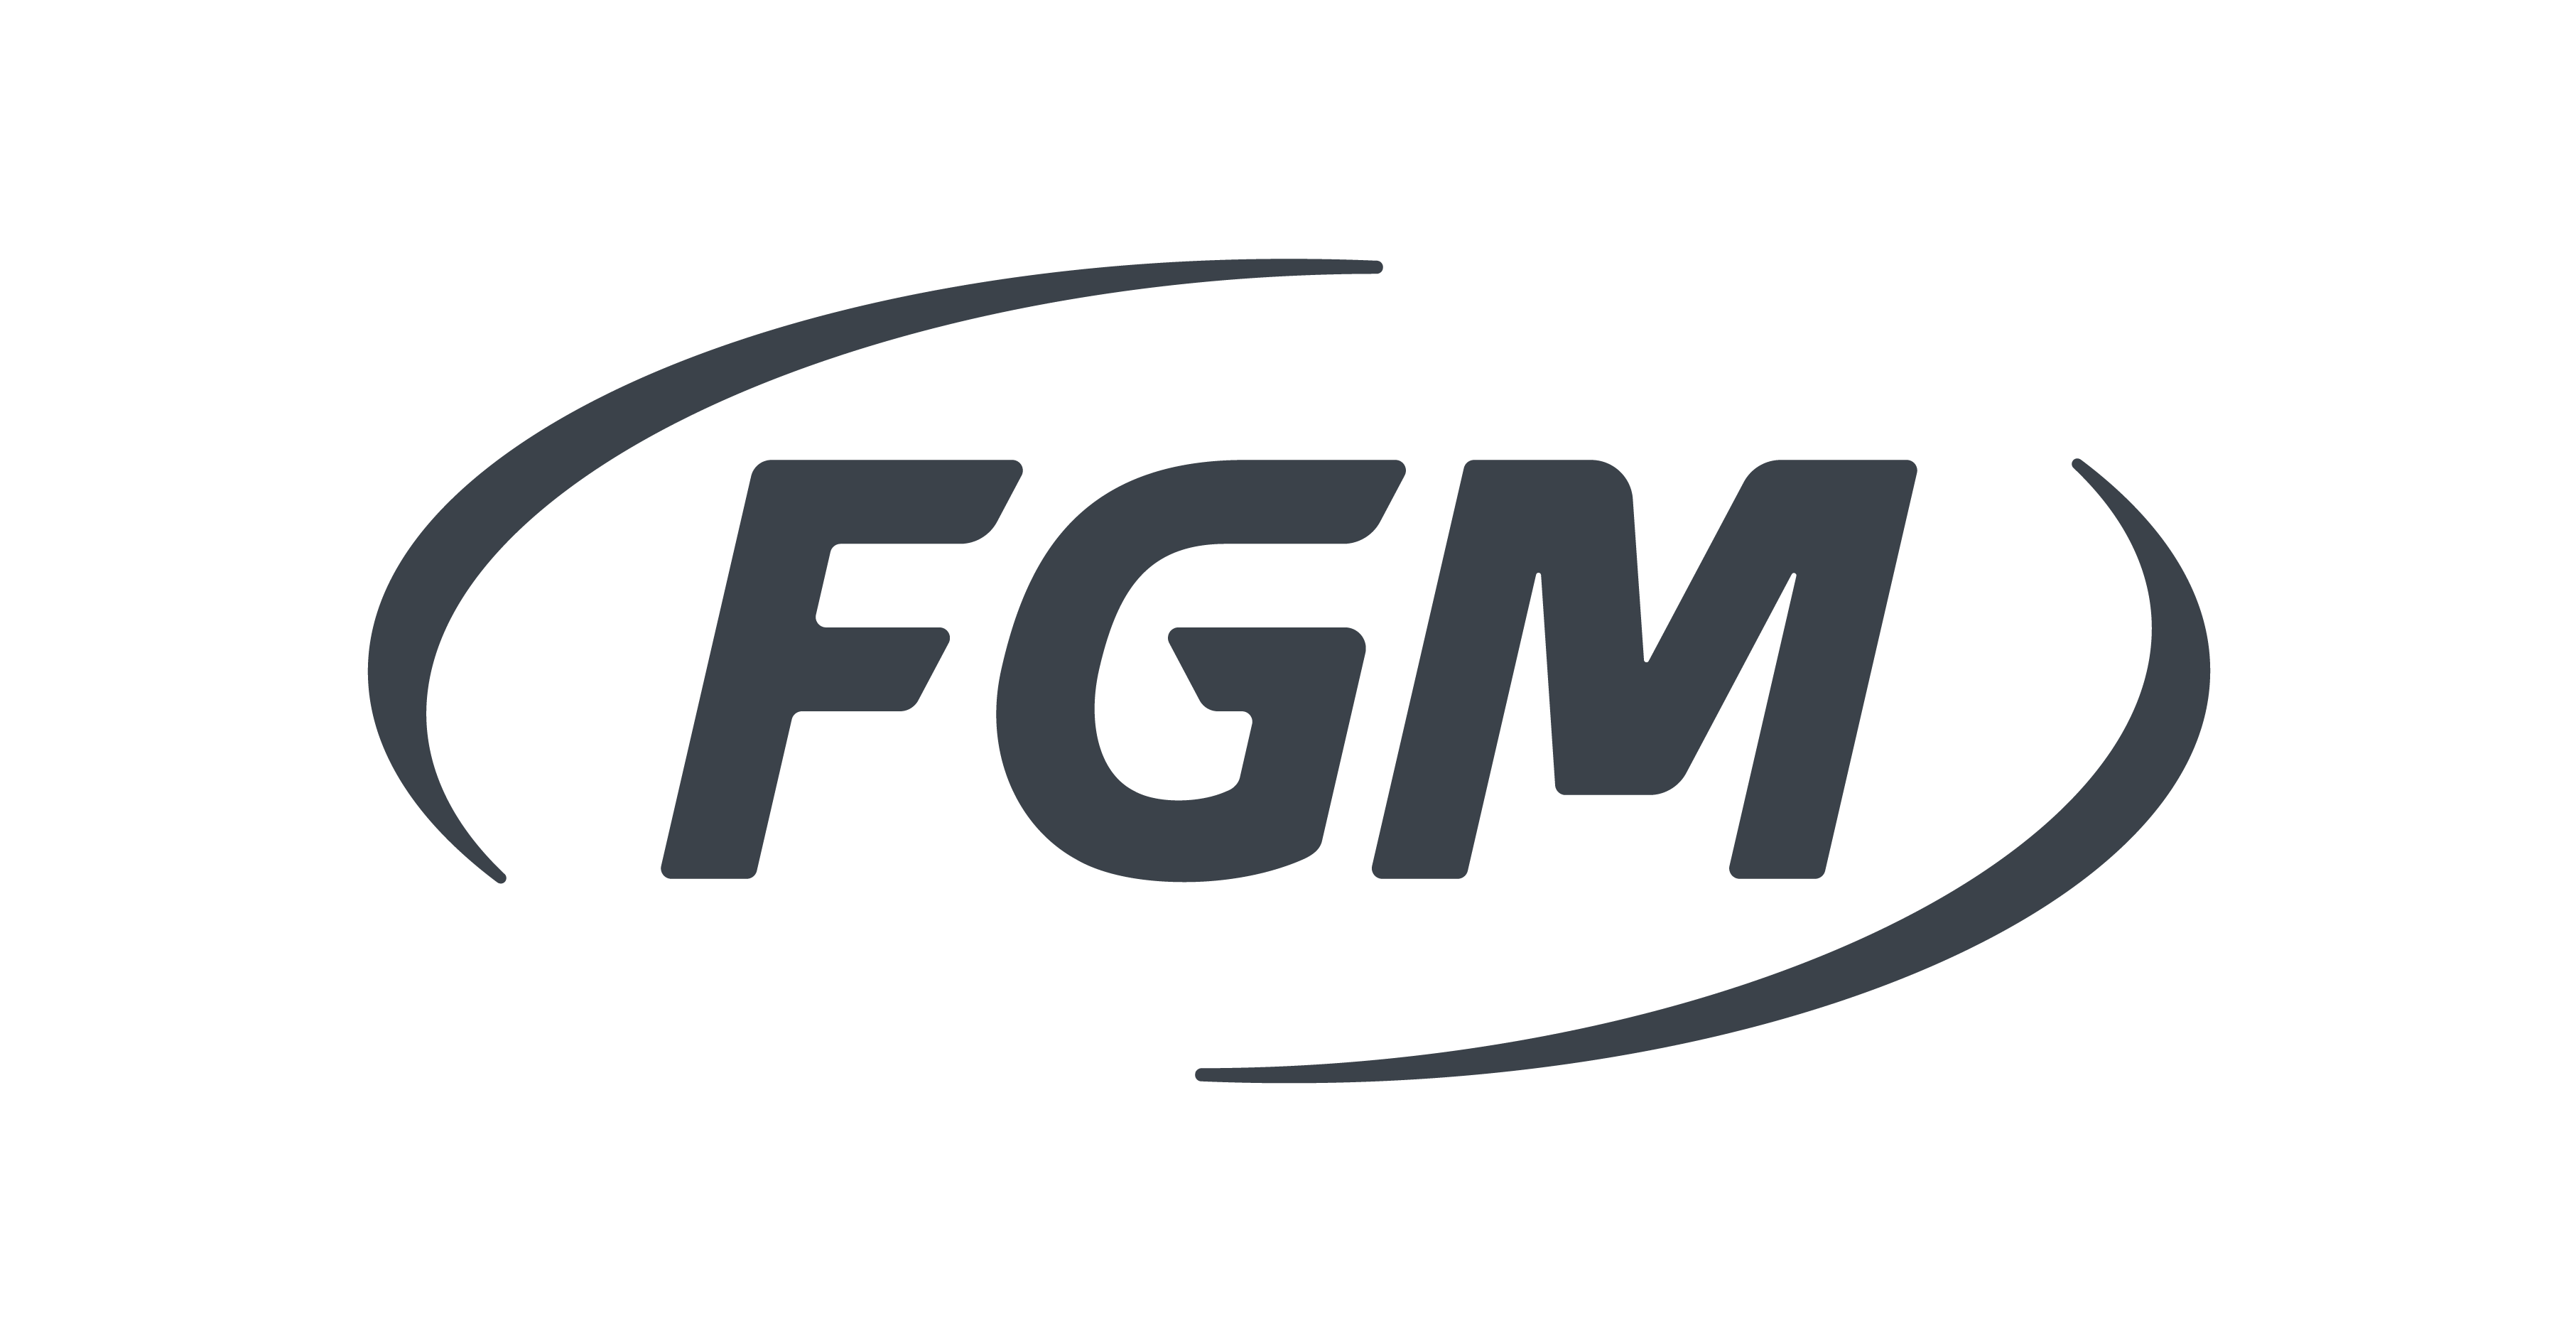 File:Fgm.png - Wikimedia Commons